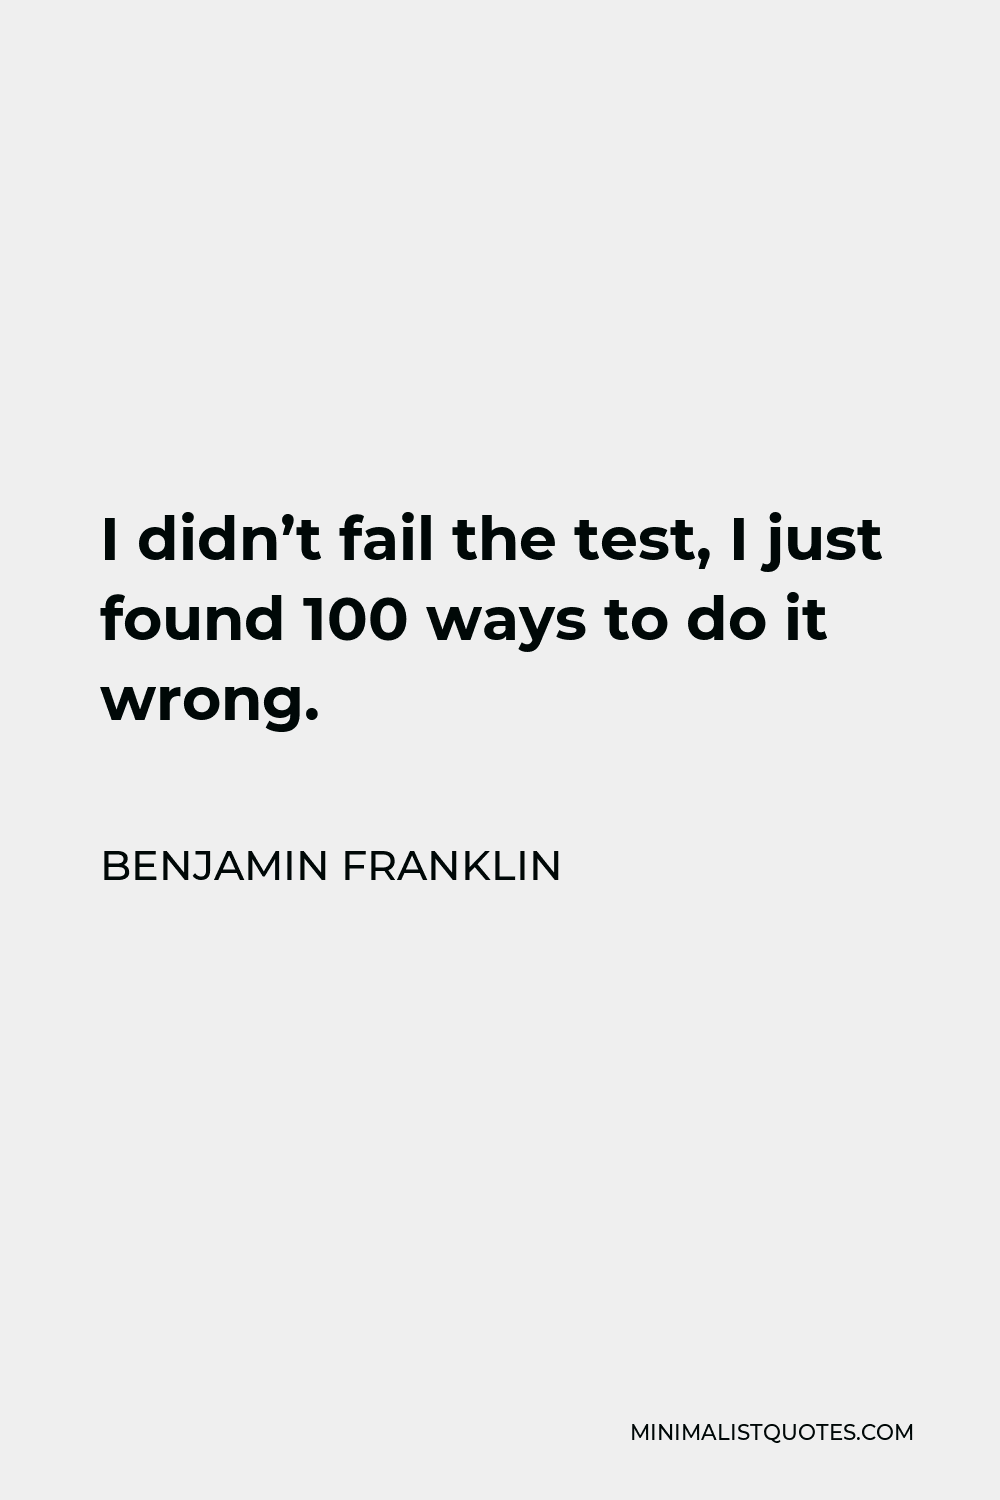 Benjamin Franklin Quote - I didn’t fail the test, I just found 100 ways to do it wrong.